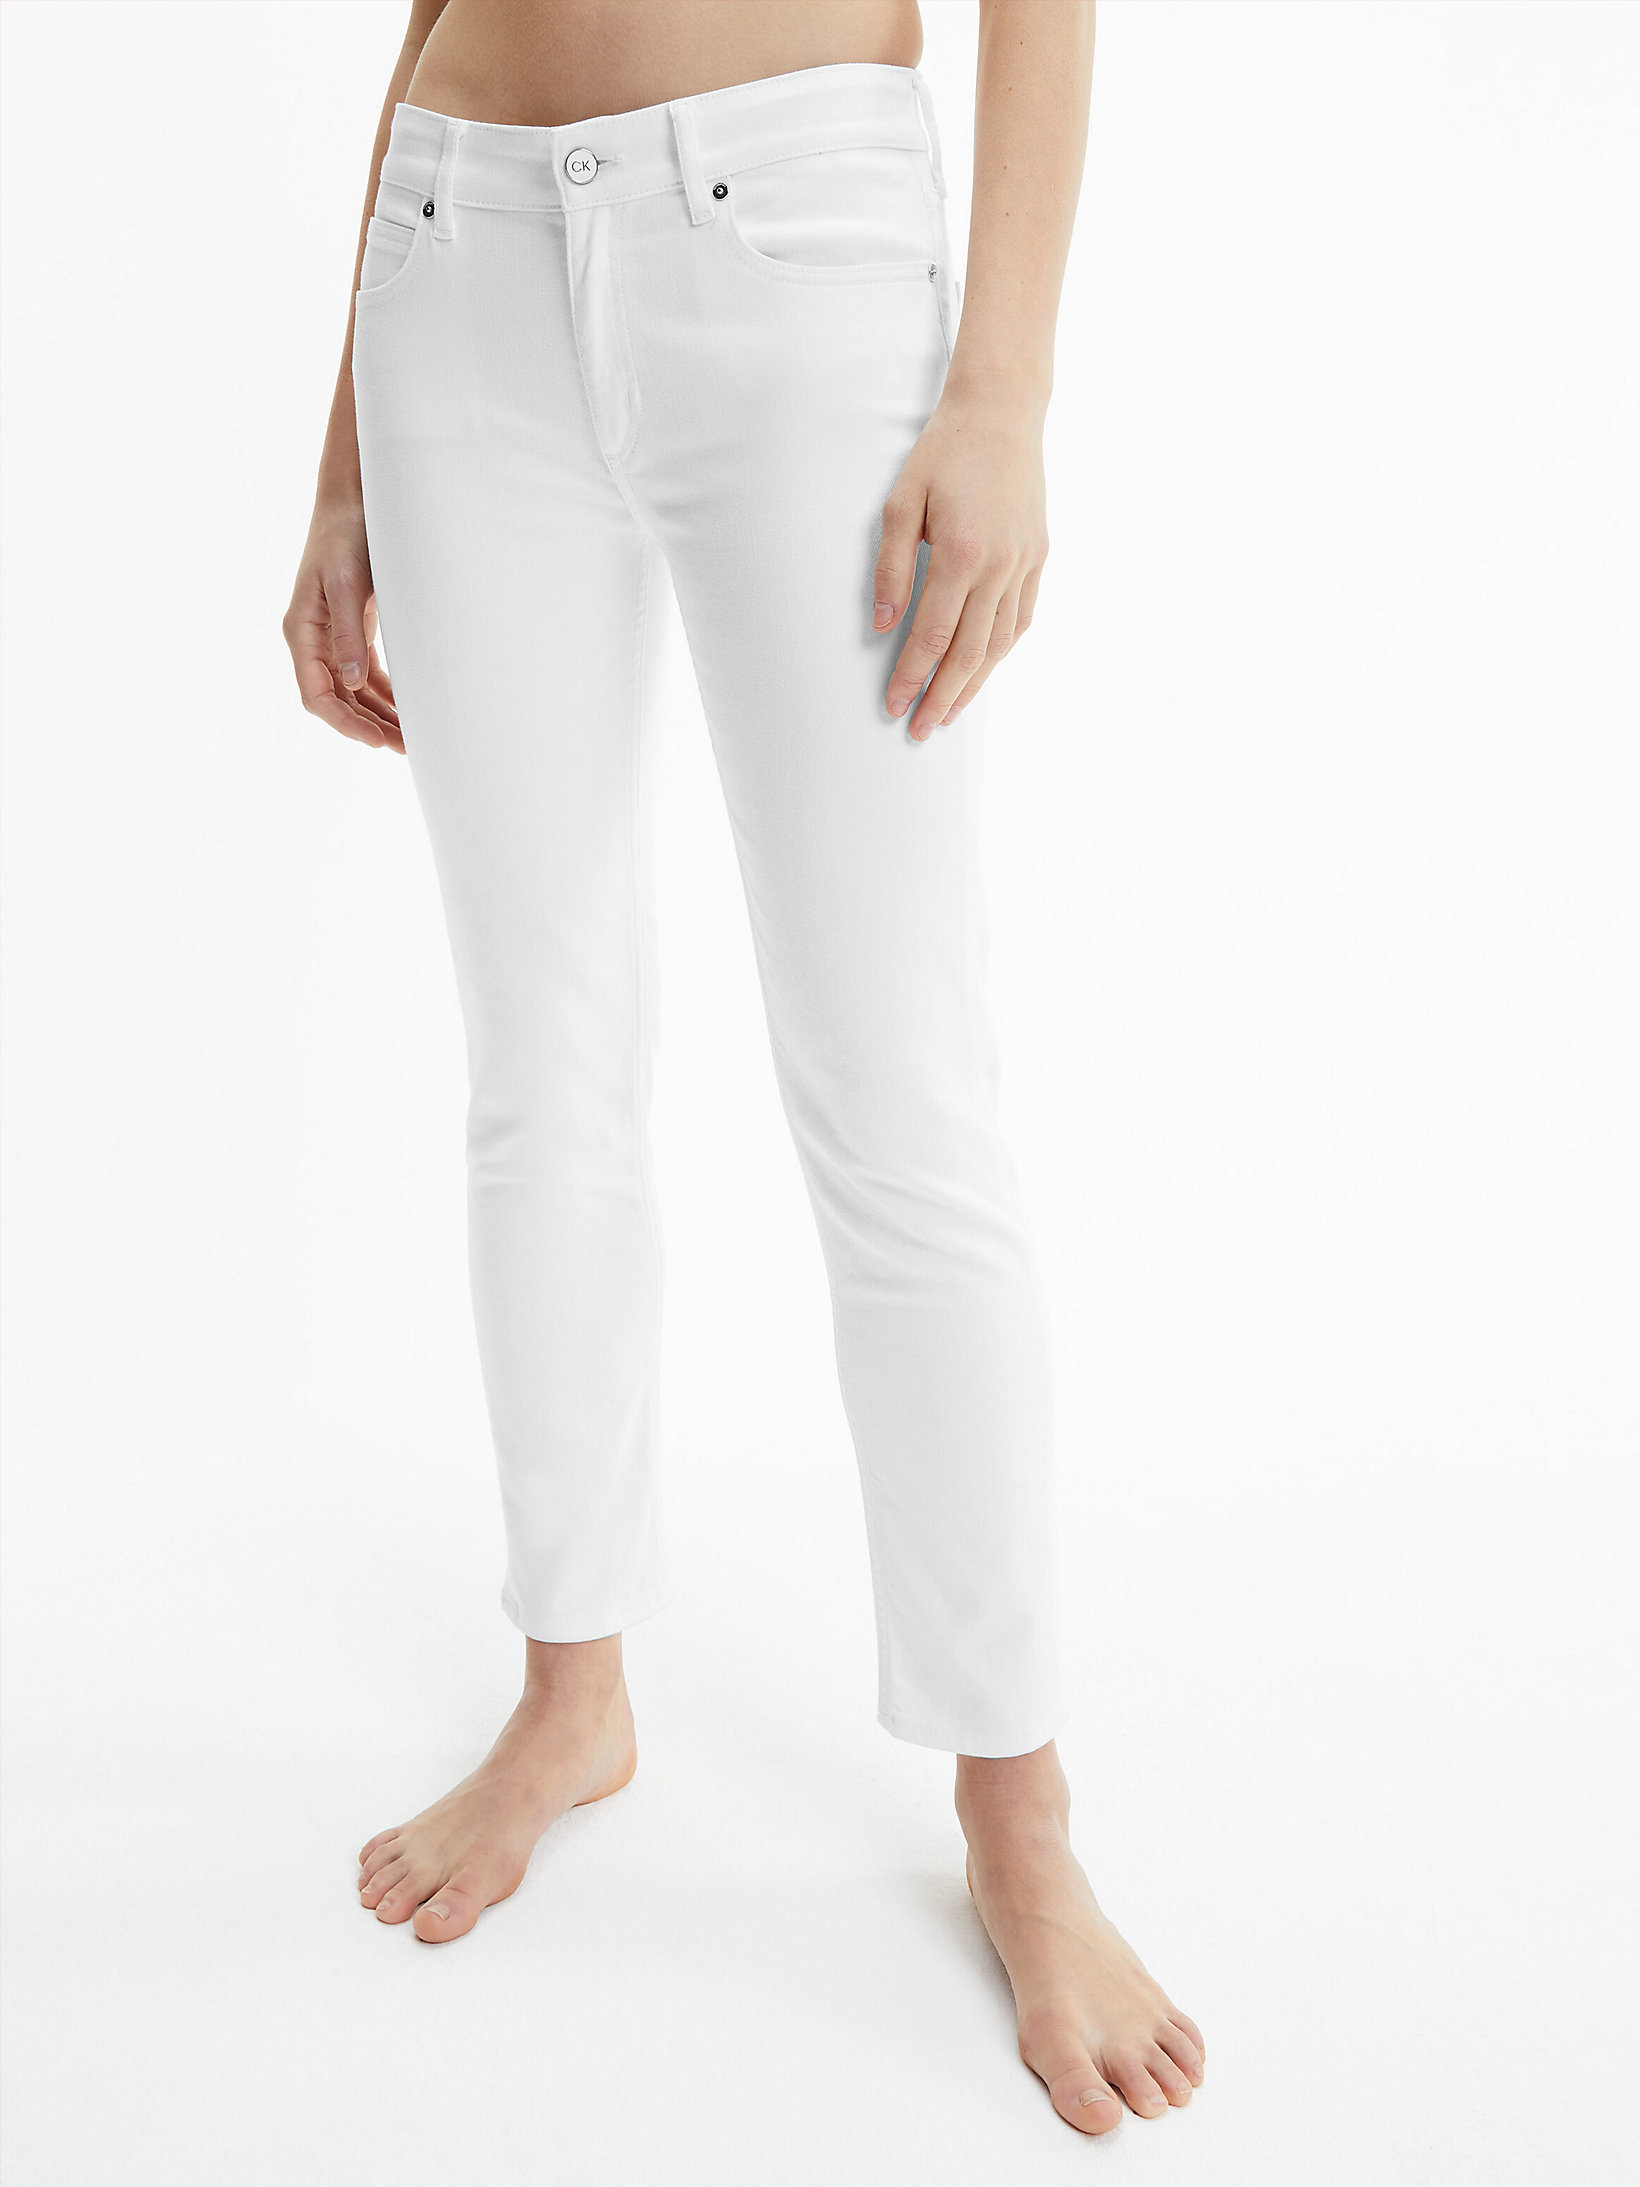 Bright White Mid Rise Slim Ankle Jeans undefined women Calvin Klein